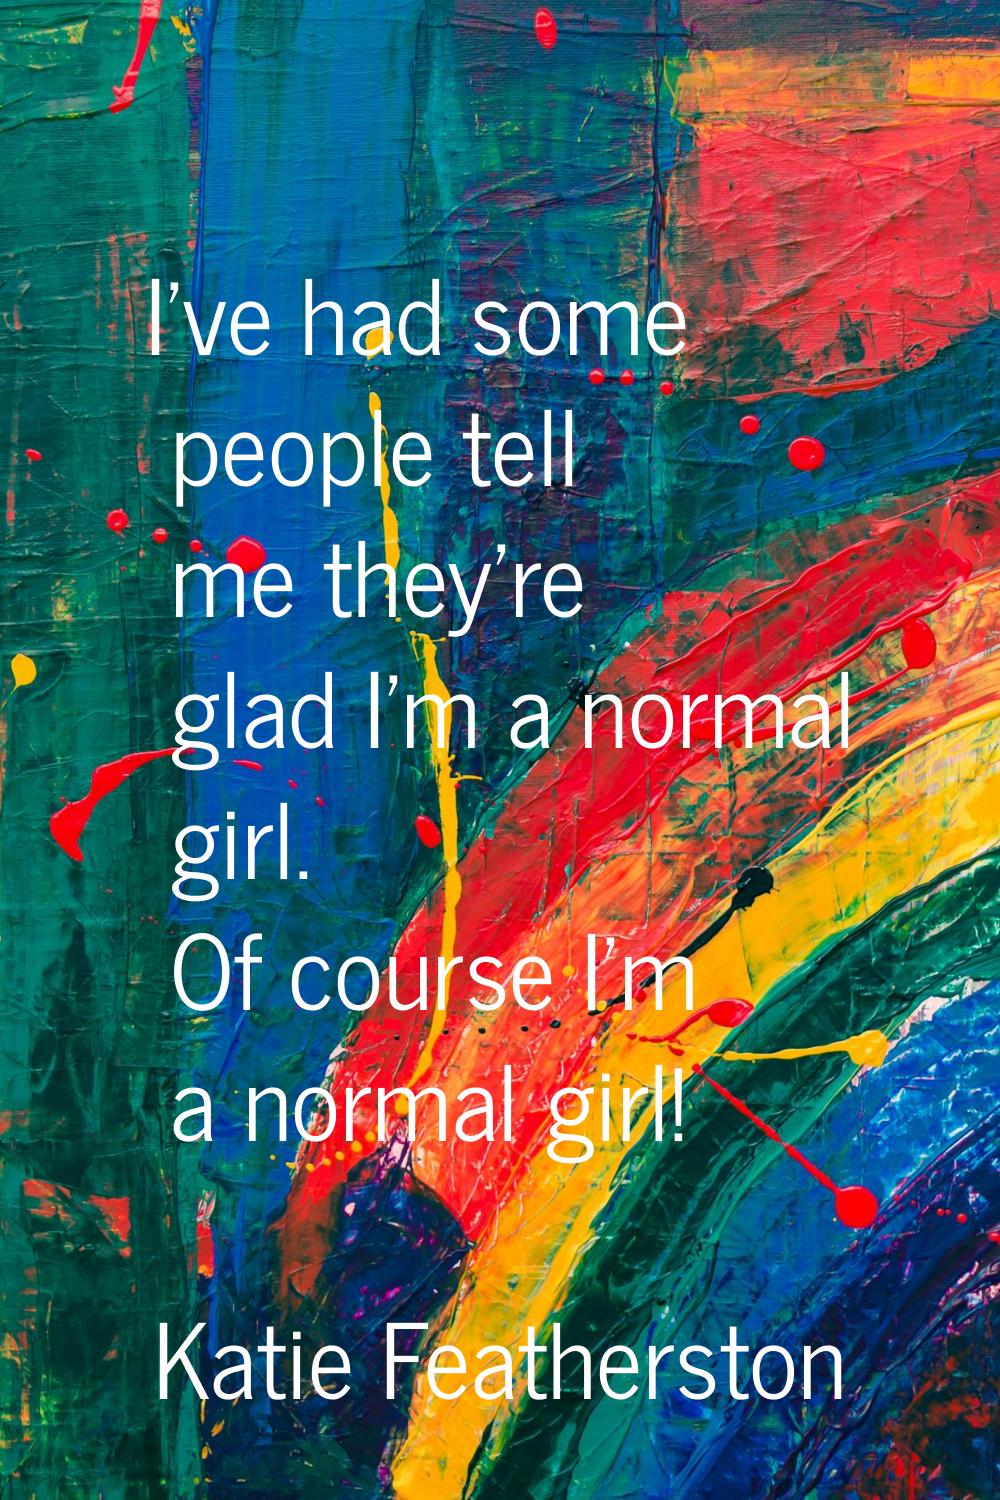 I've had some people tell me they're glad I'm a normal girl. Of course I'm a normal girl!